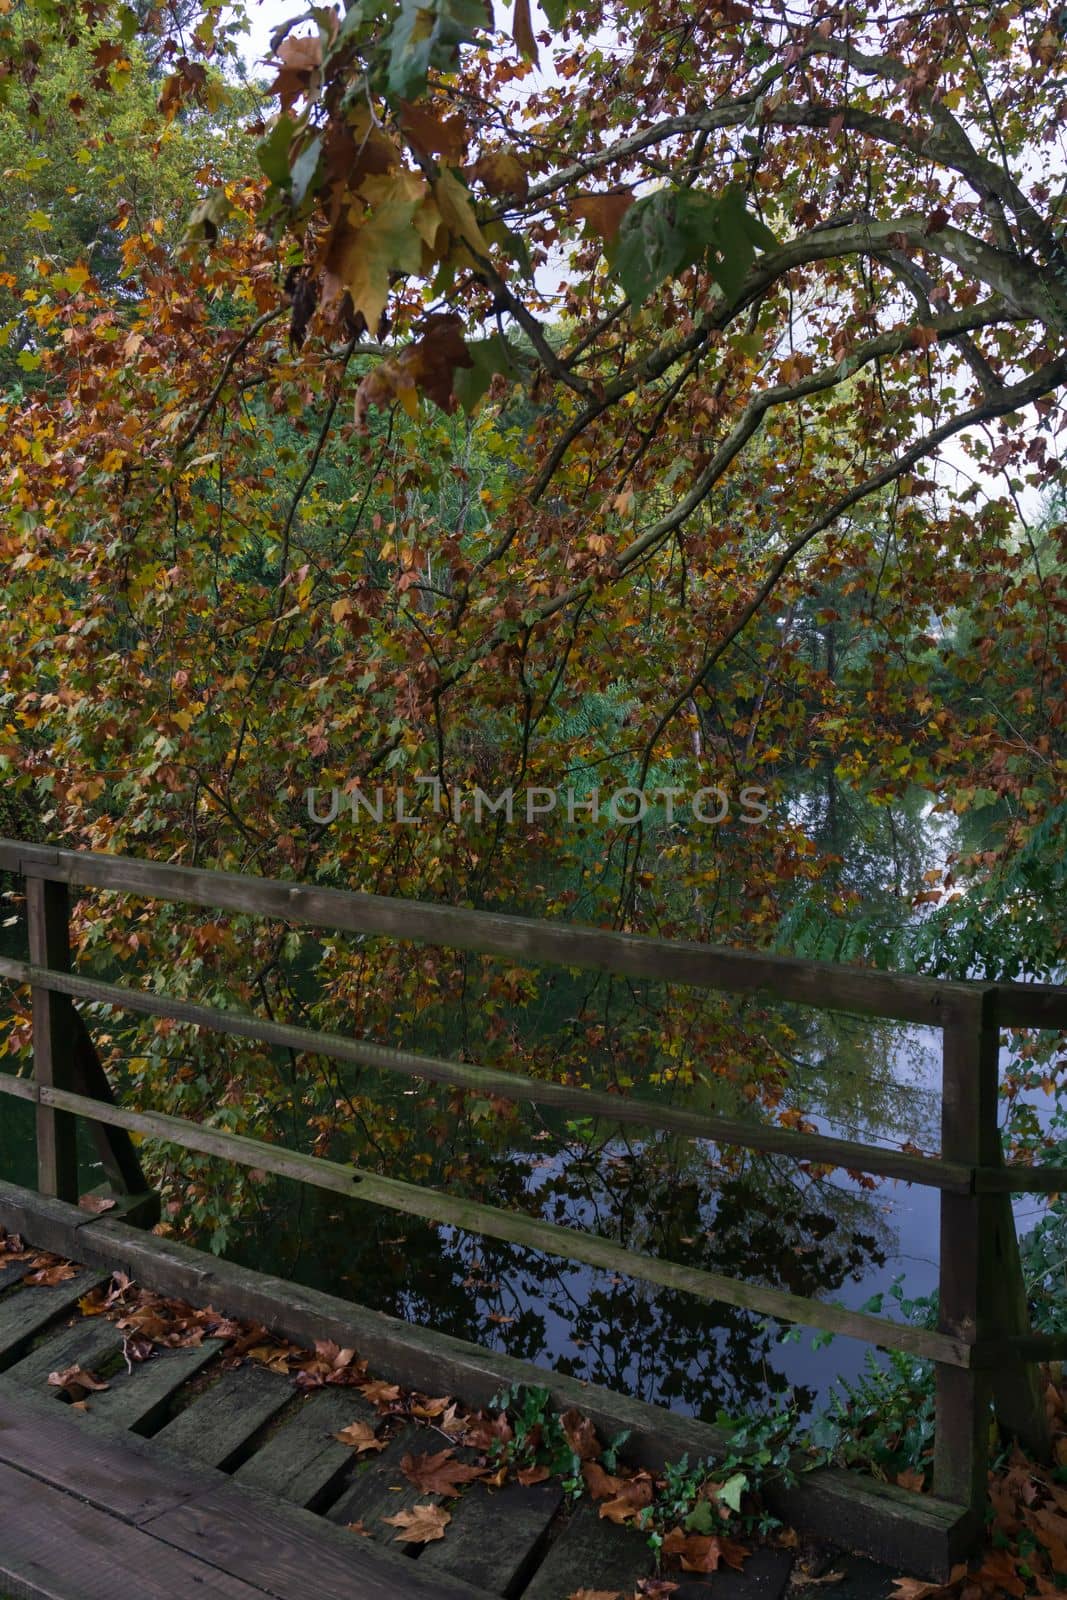 Wooden bridge across the river in the autumn park background